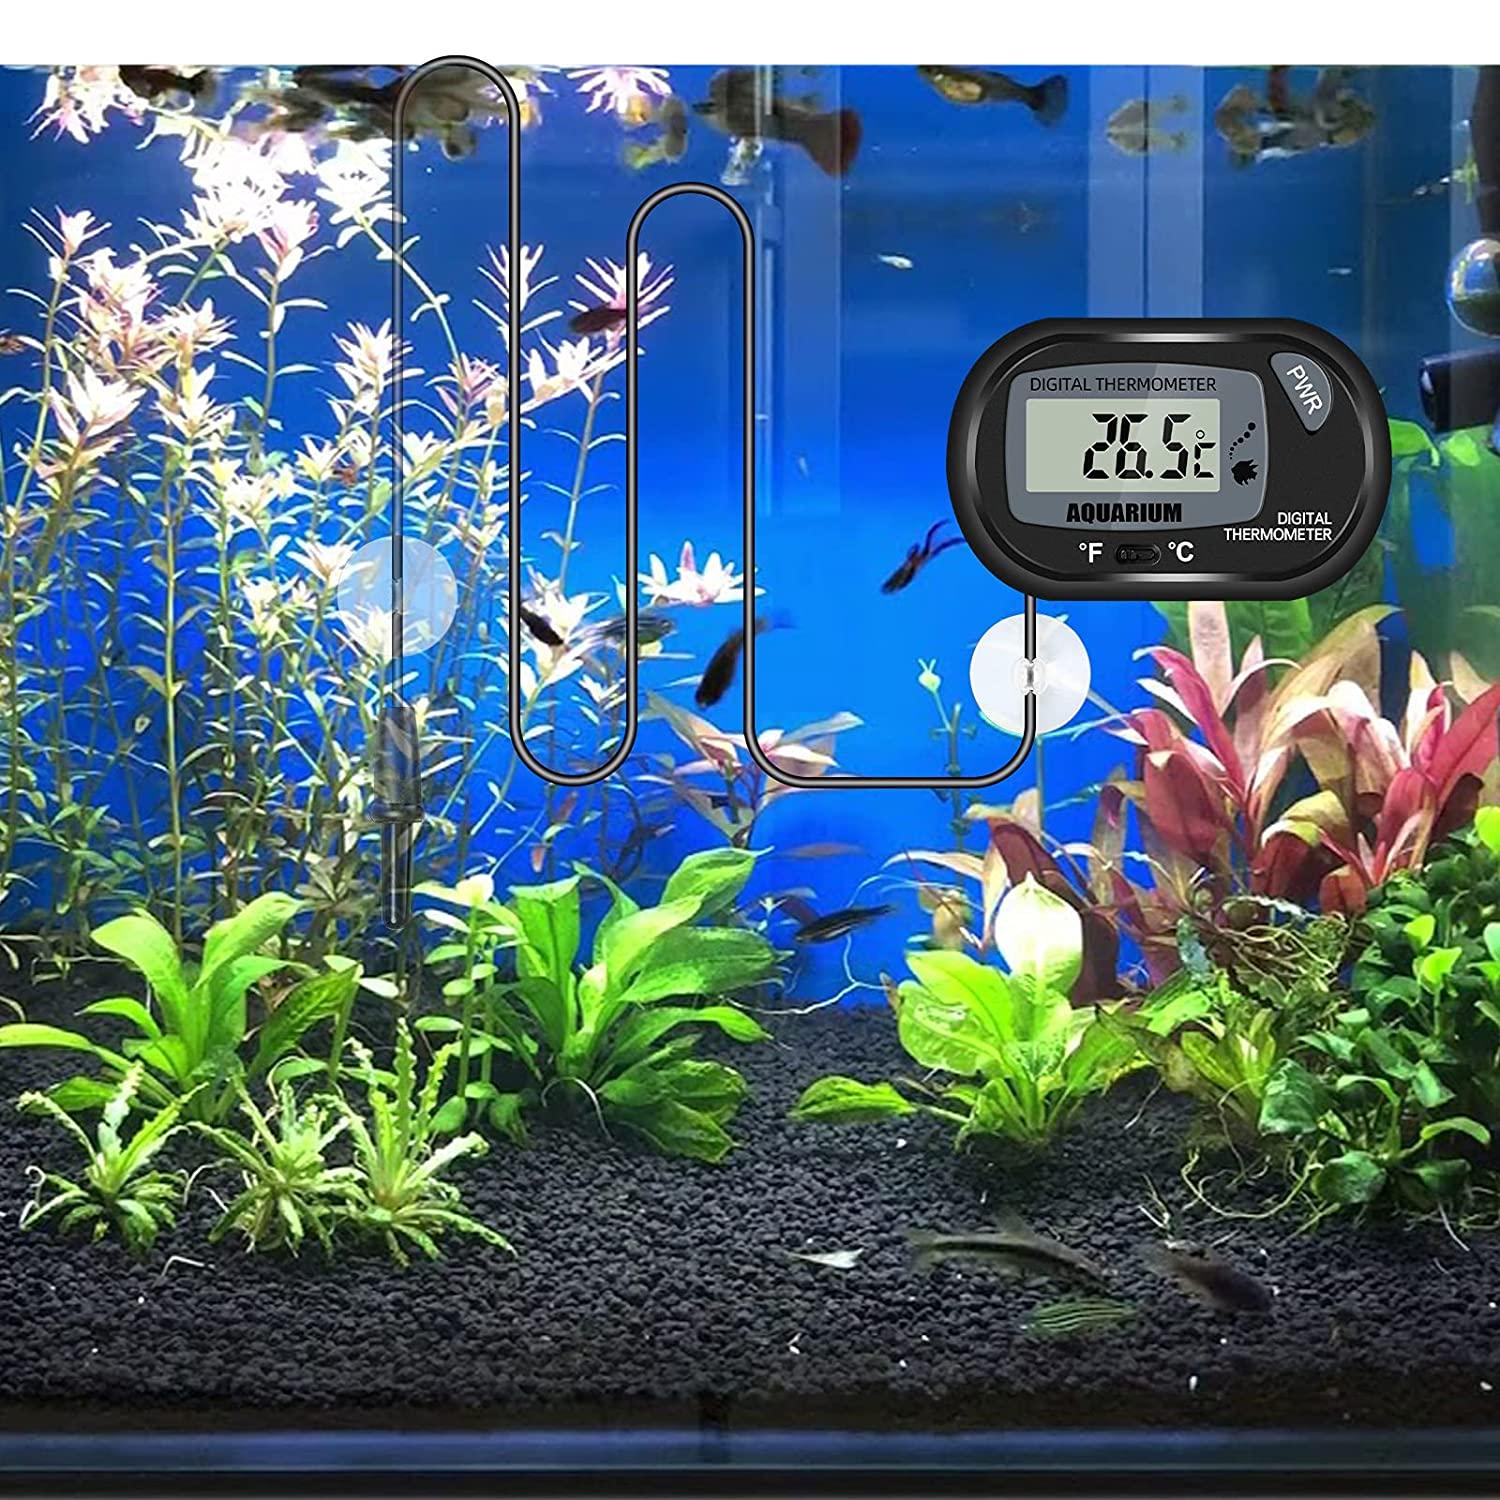 Thlevel LCD Digital Aquarium Thermometer, Fish Tank Thermometer with Water-Resistant  Sensor Probe and Suction Cup for Reptile, Turtle Incubators, Terrarium  Water Thermometer (4)